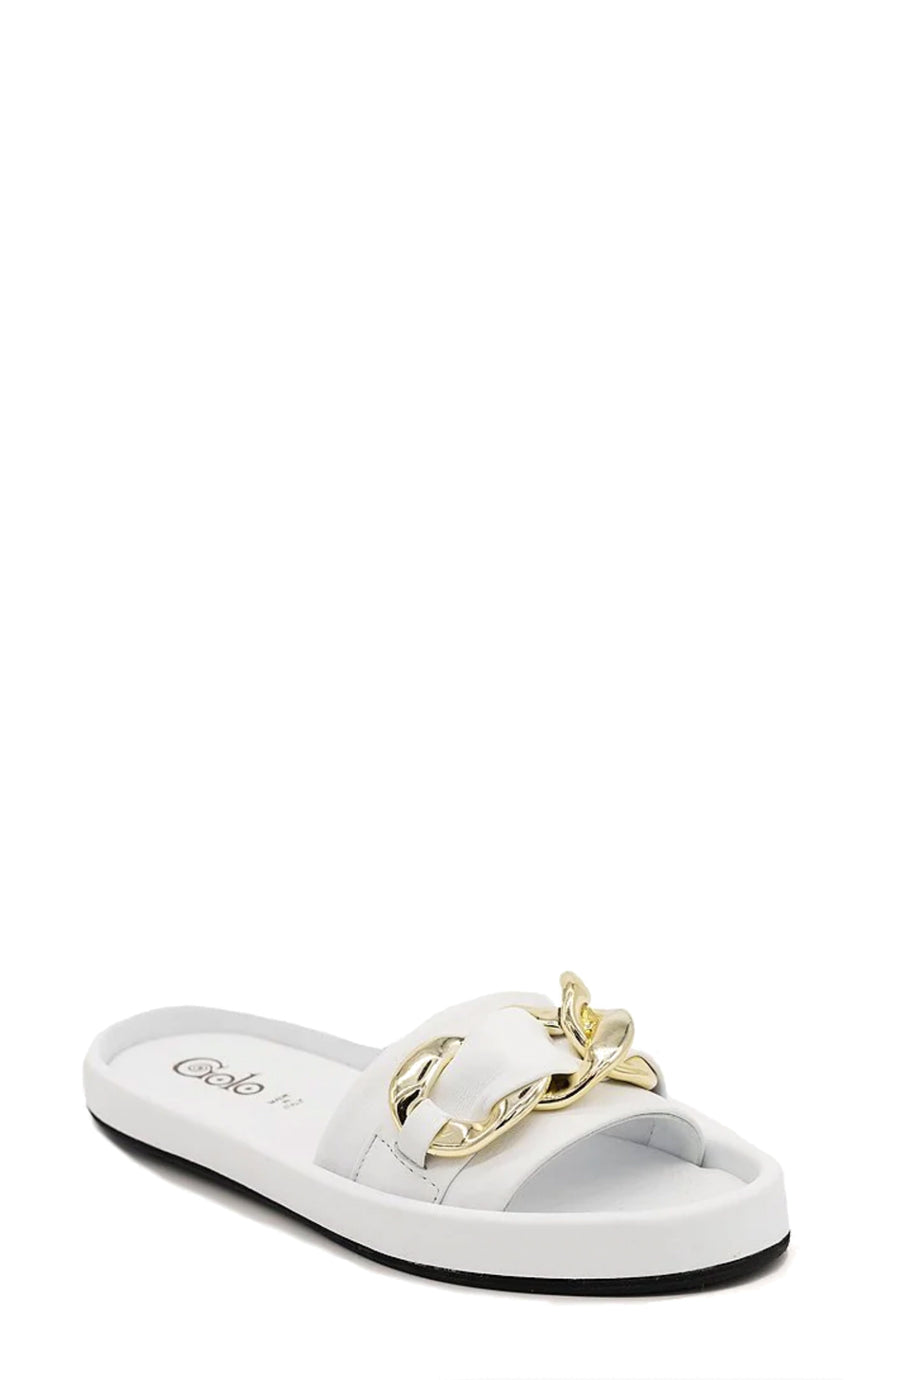 Trieste Golo Shoes 6 White Suede